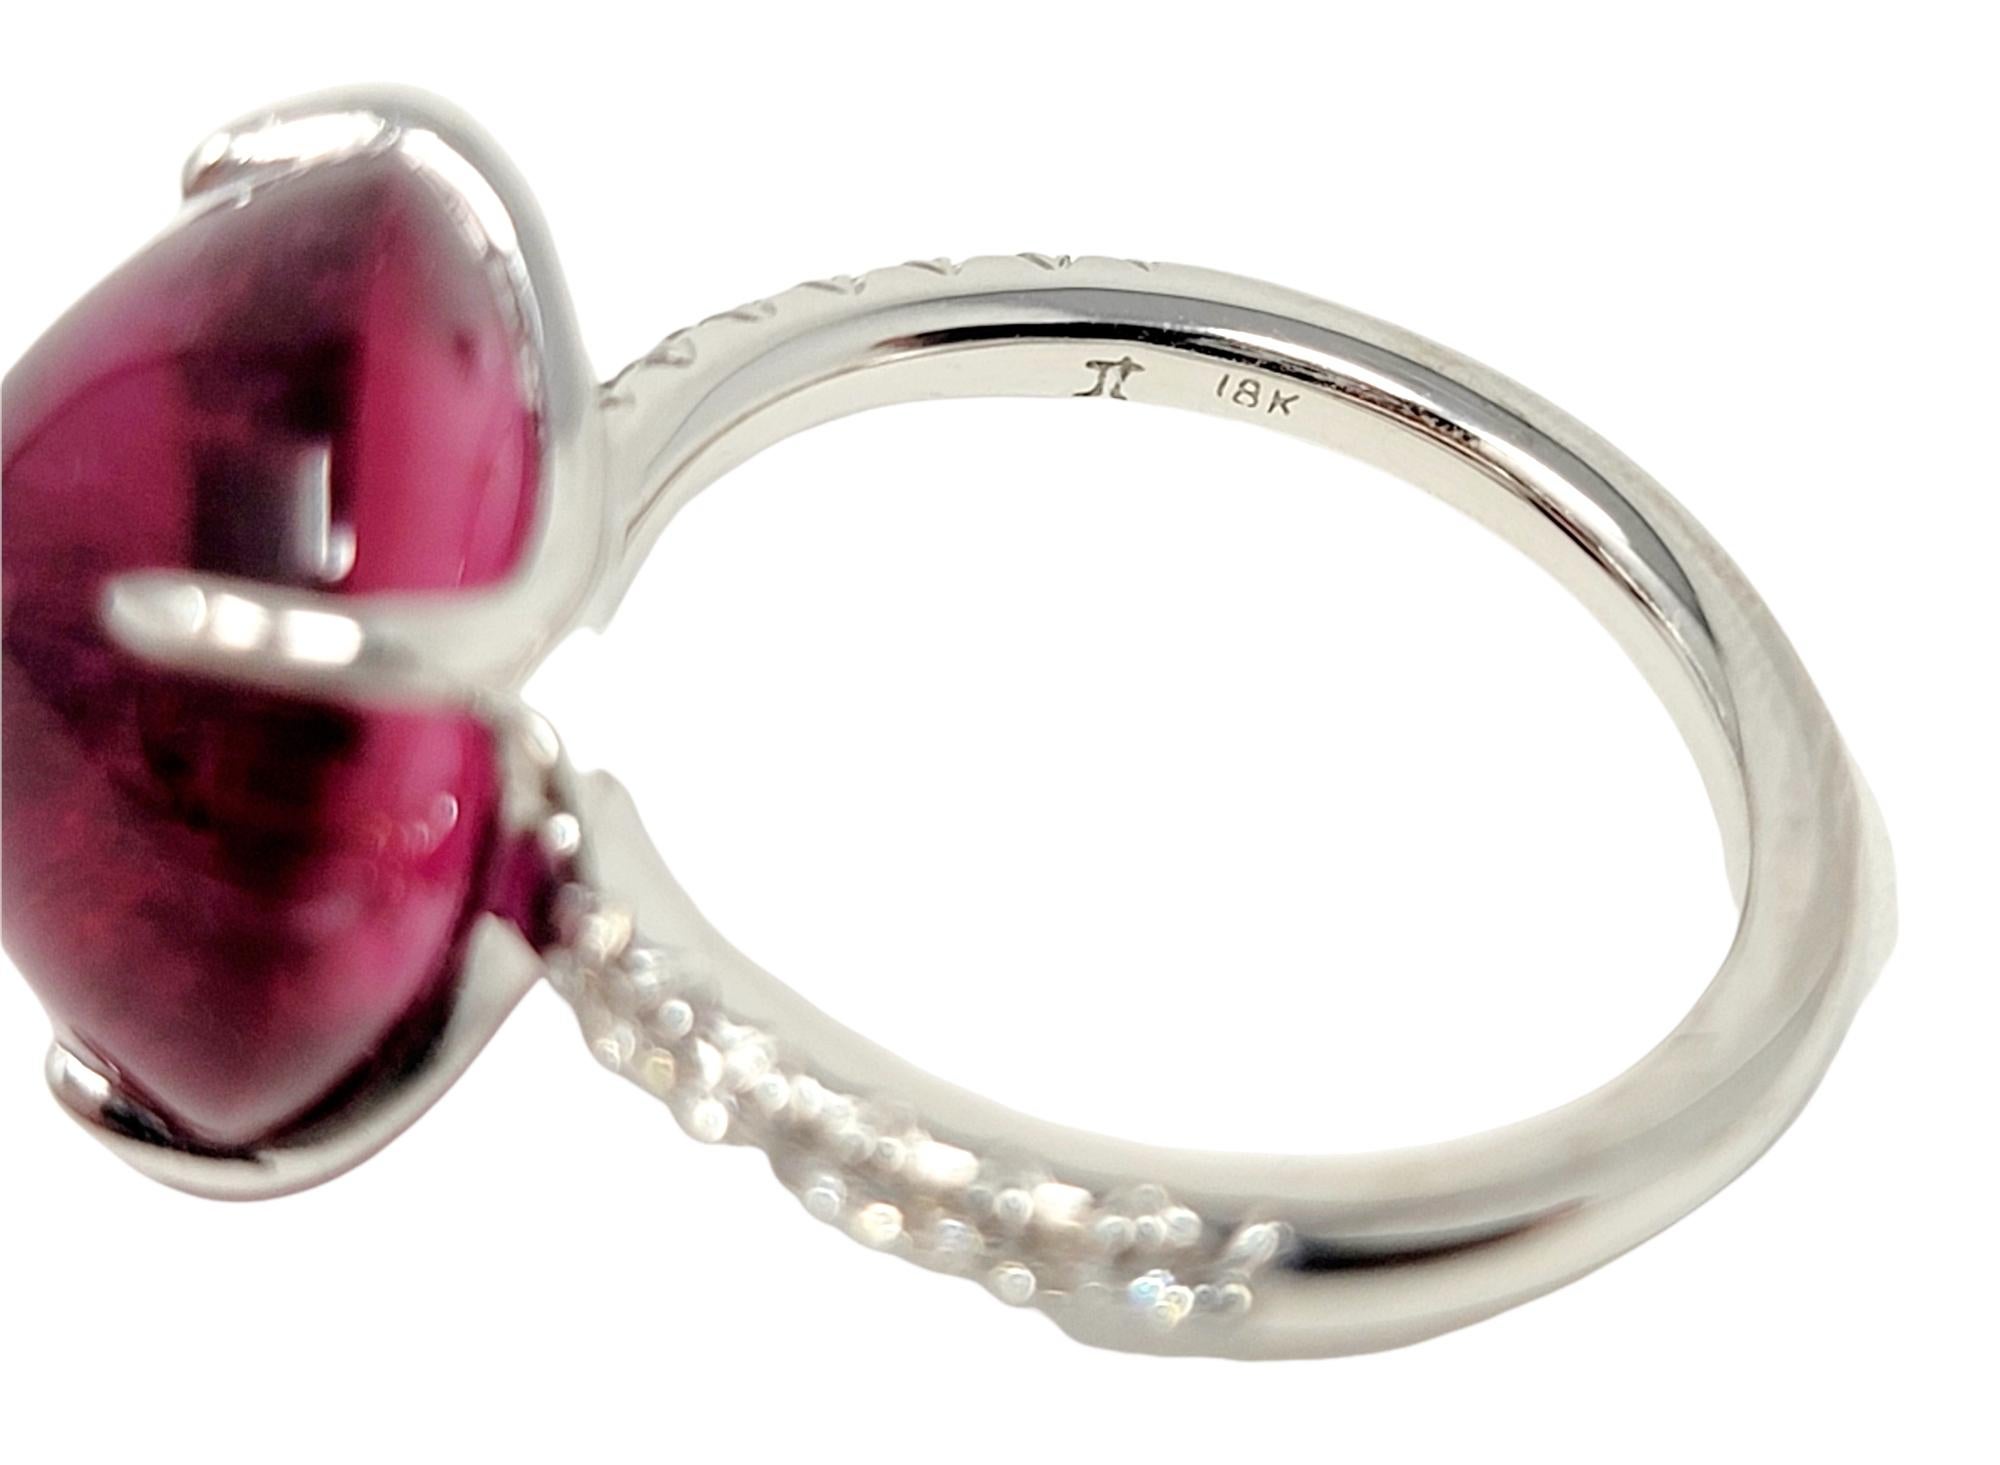 Cabochon Rubelite Solitaire 18 Karat White Gold Cocktail Ring with Pave Diamond For Sale 11